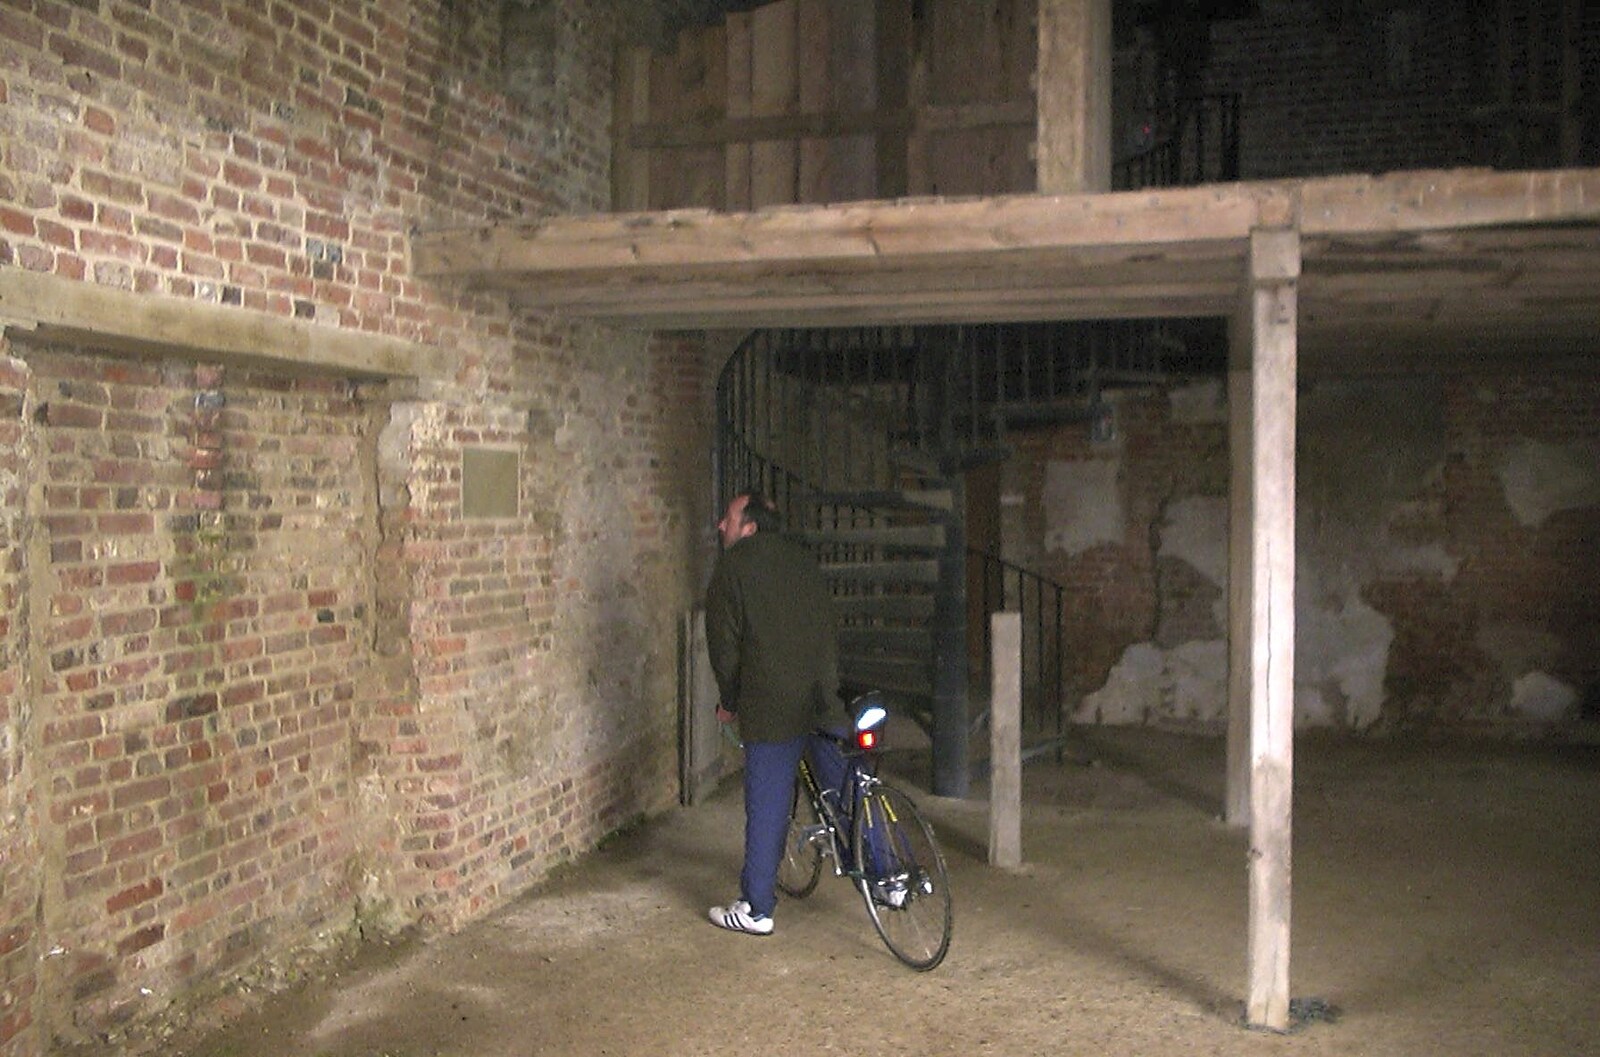 The BSCC Annual Bike Ride, Lenham, Kent - 8th May 2004: DH pokes about in the old barn